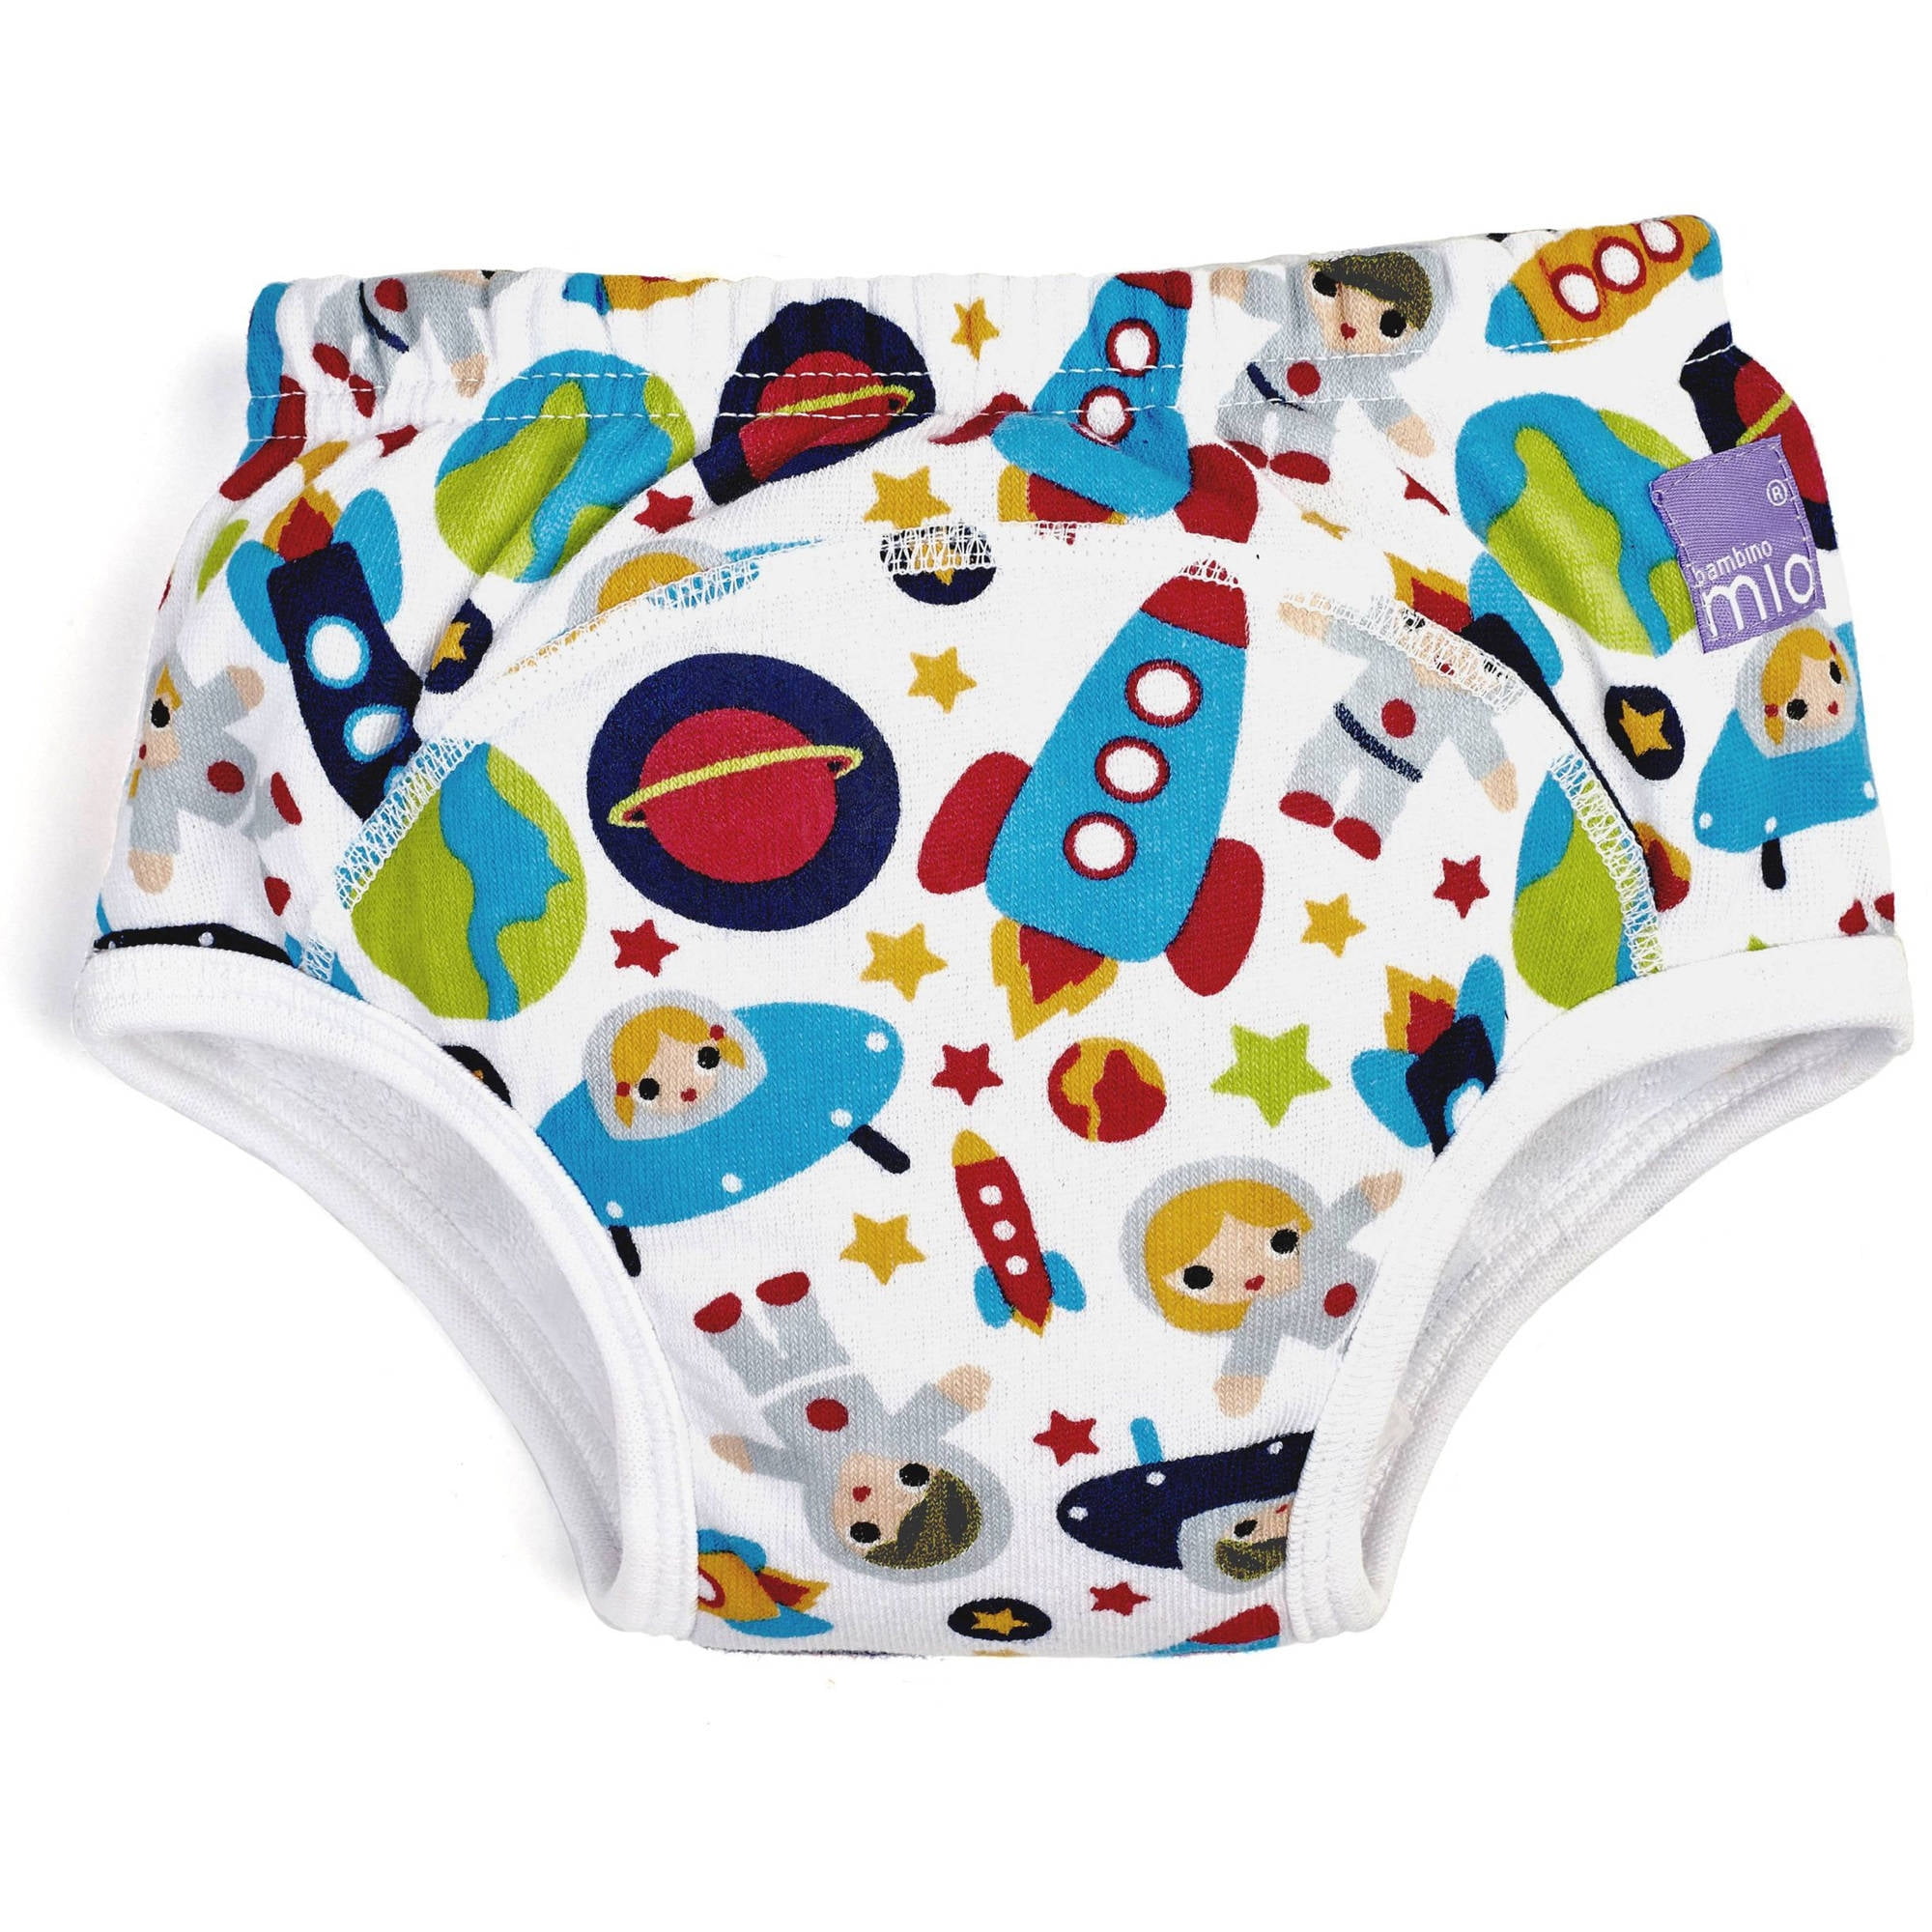 Bambino Mio - Potty Training Pants - Outer Space Edition - Choose Your Size!